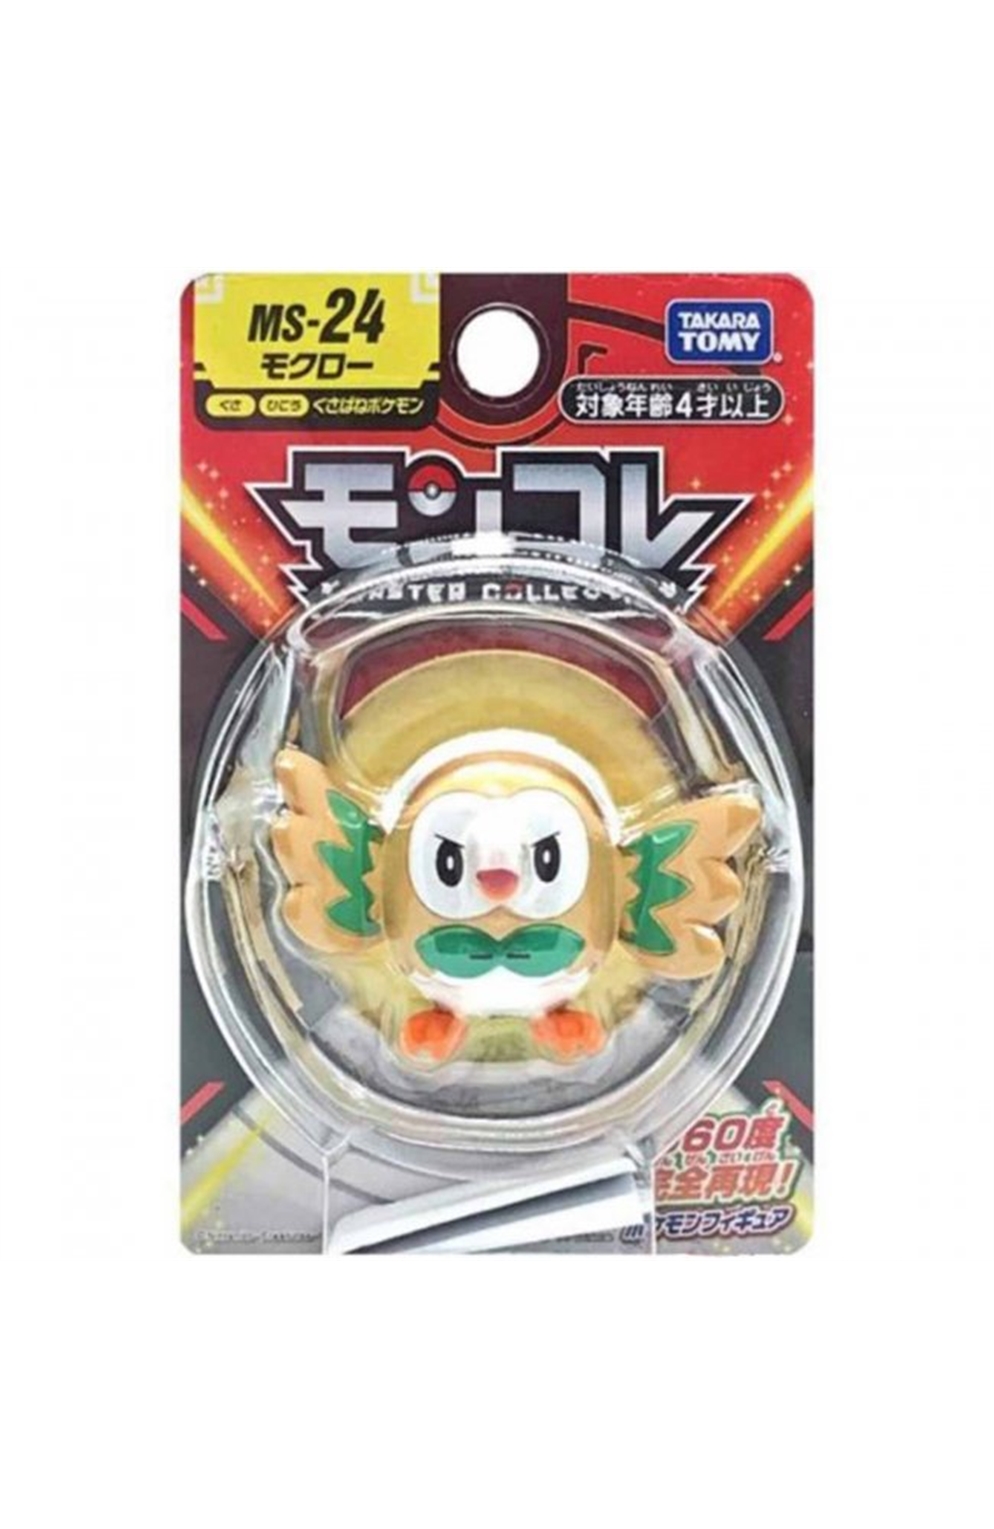 Pokemon Monster Collection Ms-24 Rowlet Figure